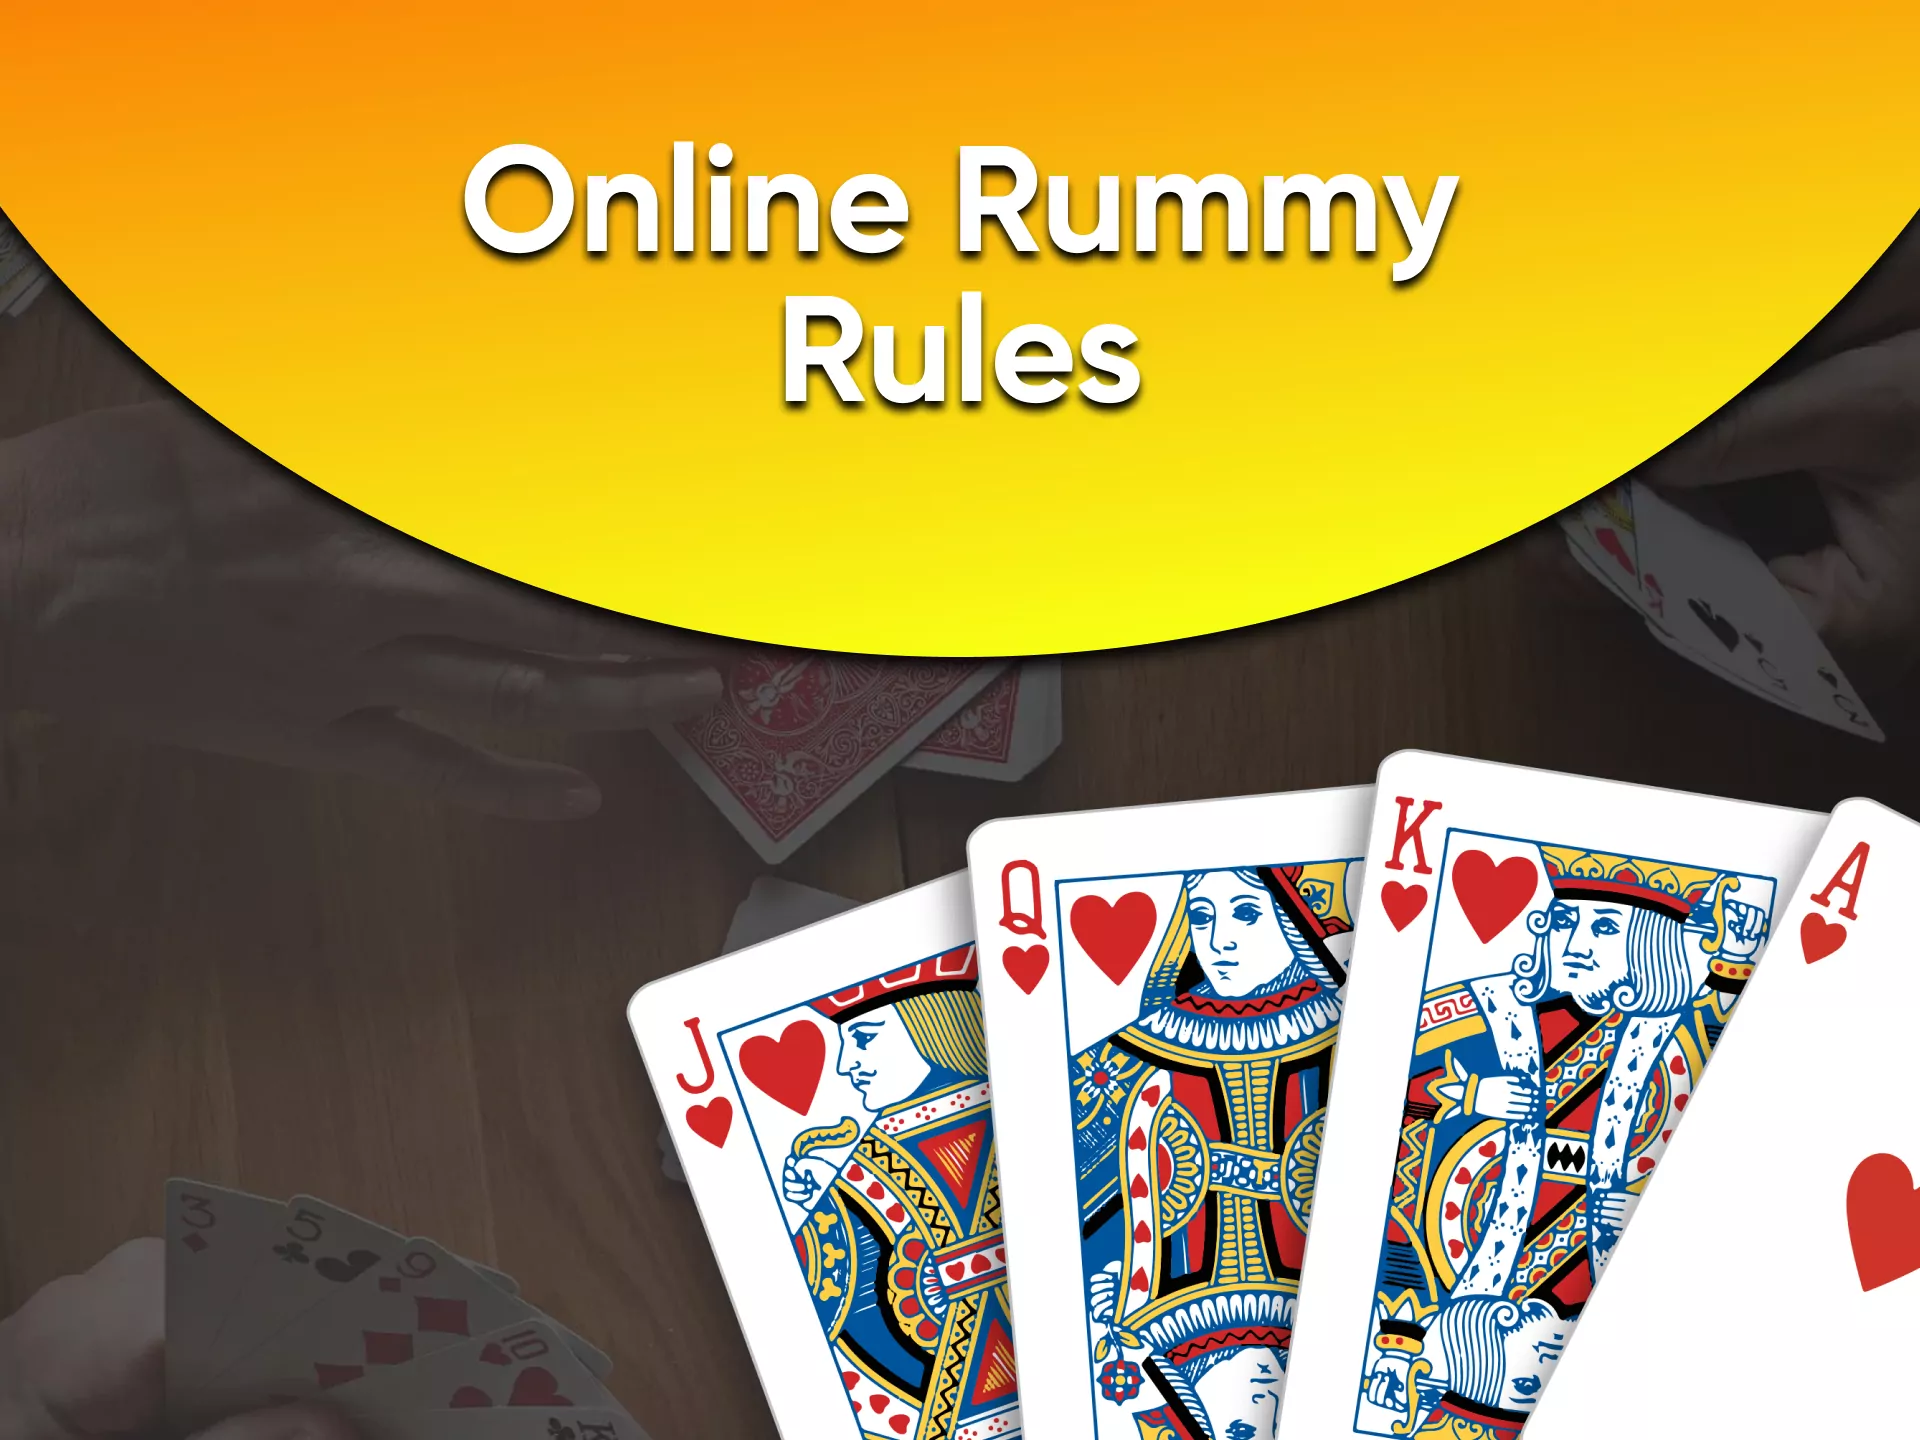 Learn the rules before playing Rummy.